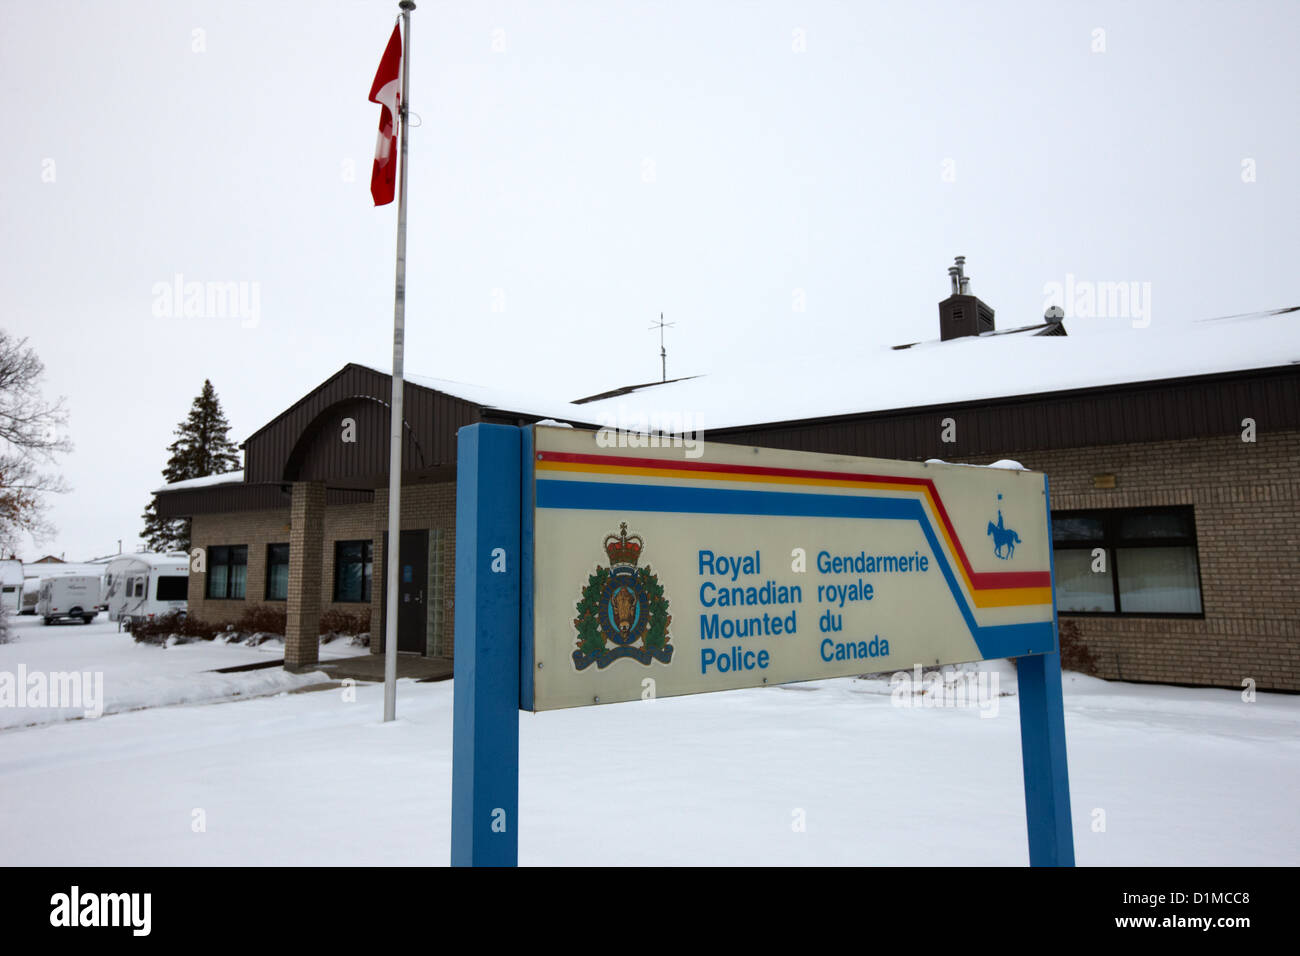 rcmp royal canadian mounted police station in the small town of Kamsack Saskatchewan Canada Stock Photo